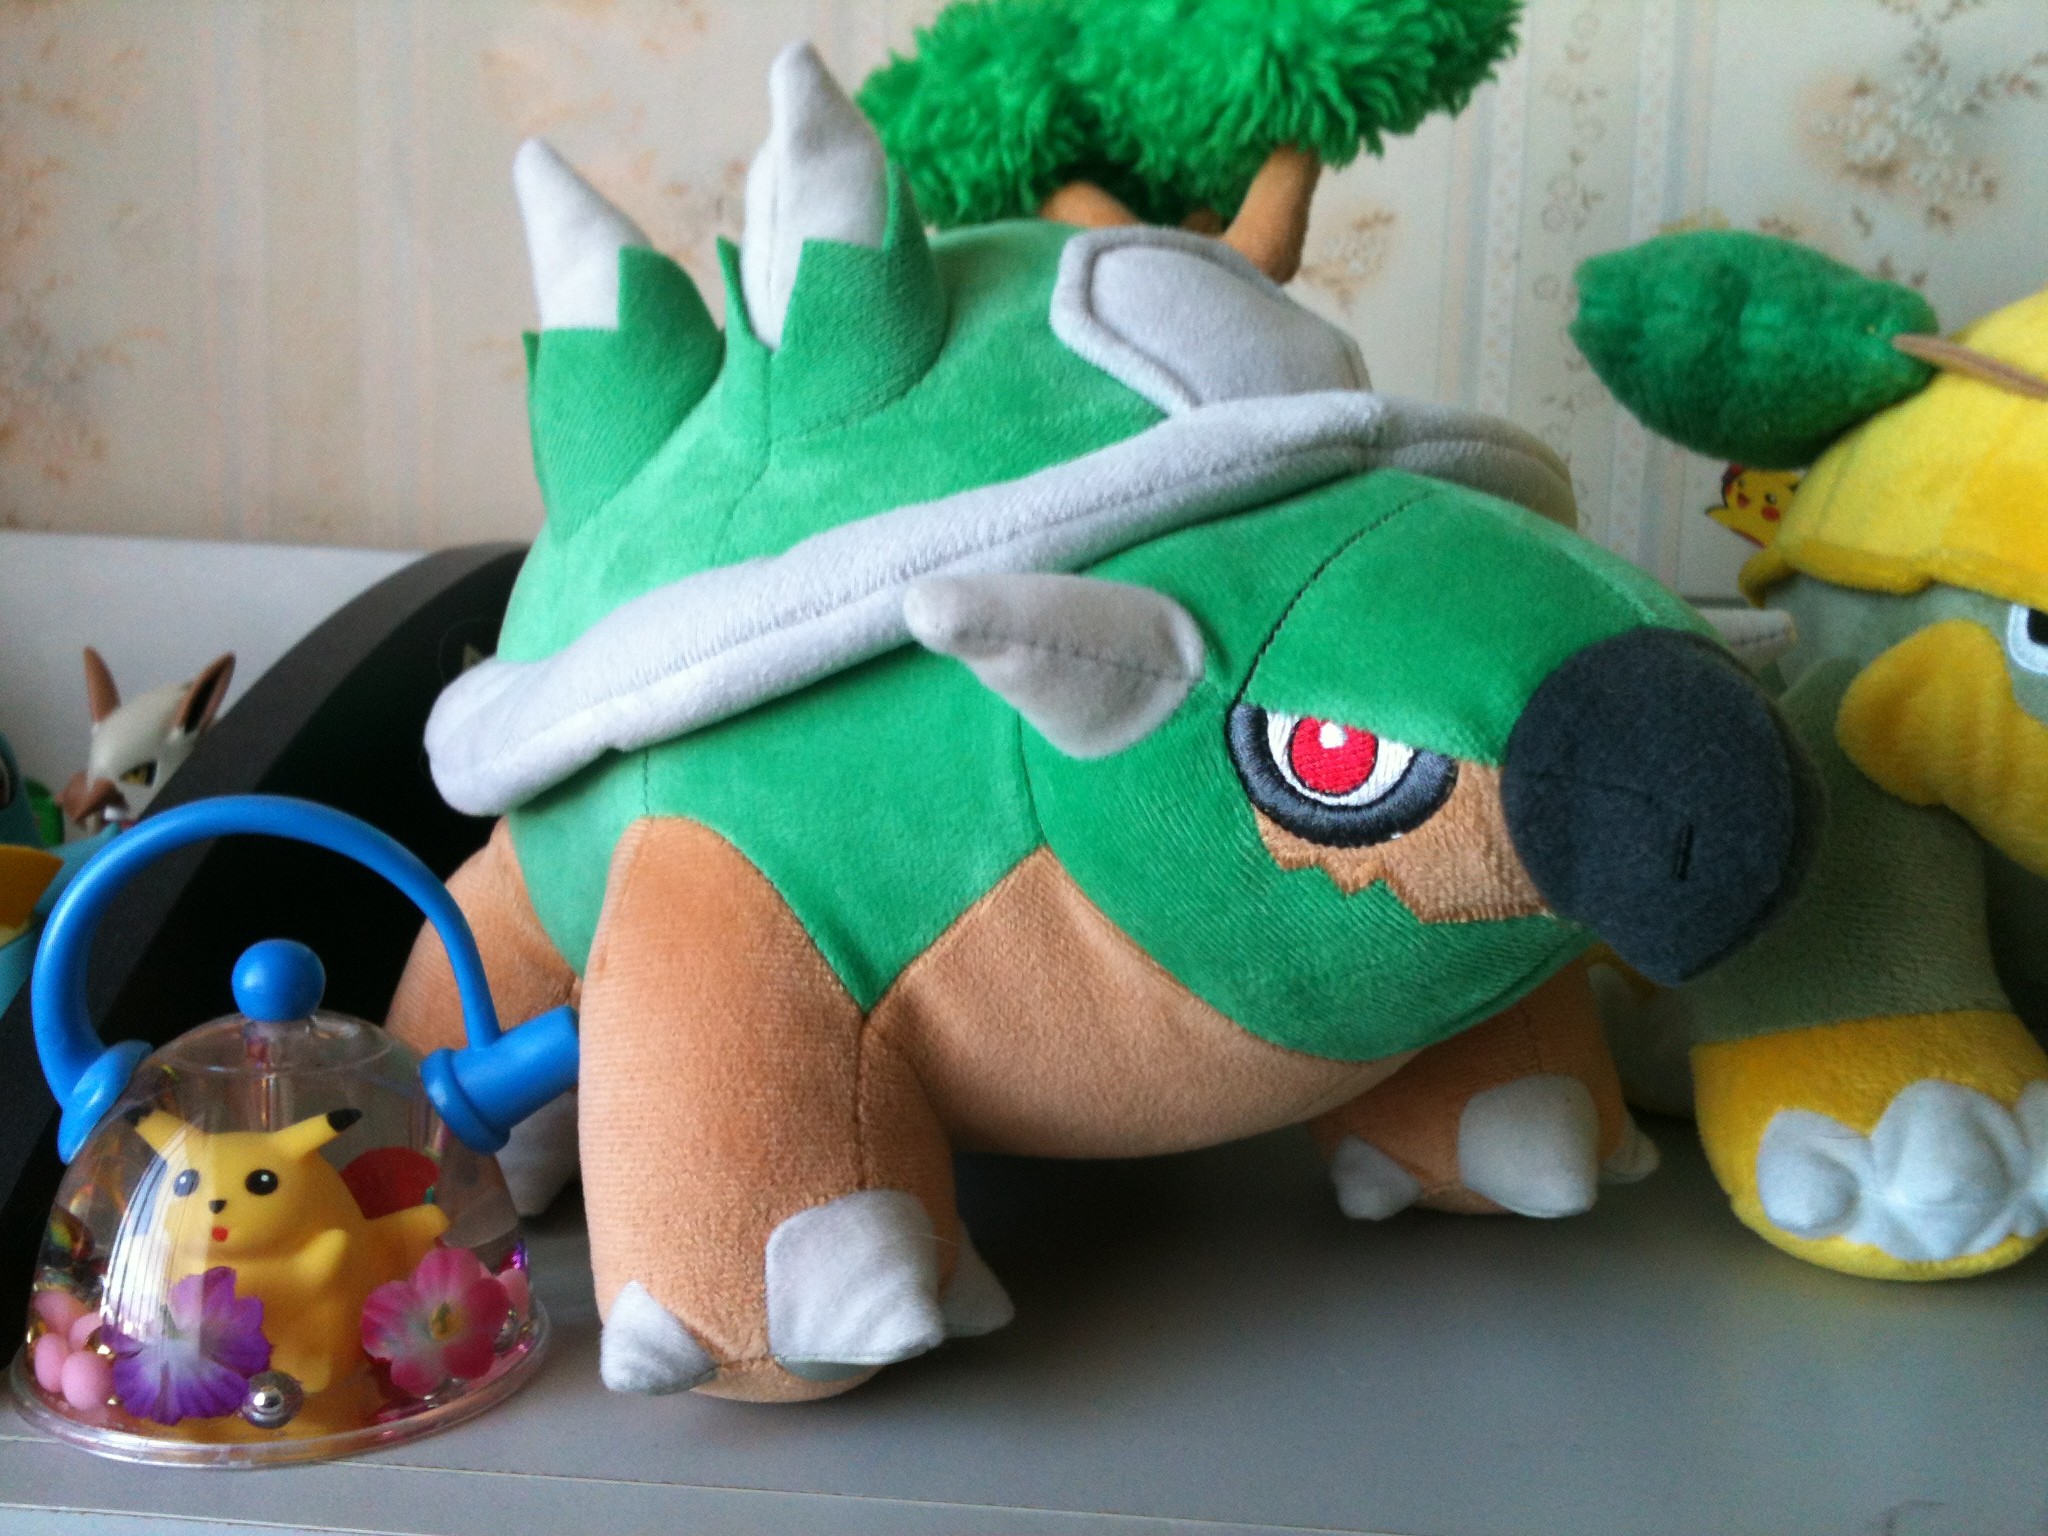 2048x1536 Takara Tomy Torterra plush: It's one of my life-time wishes come true! This  plush is my favorite! I always had an eye on it and thought I'd never get  it ...